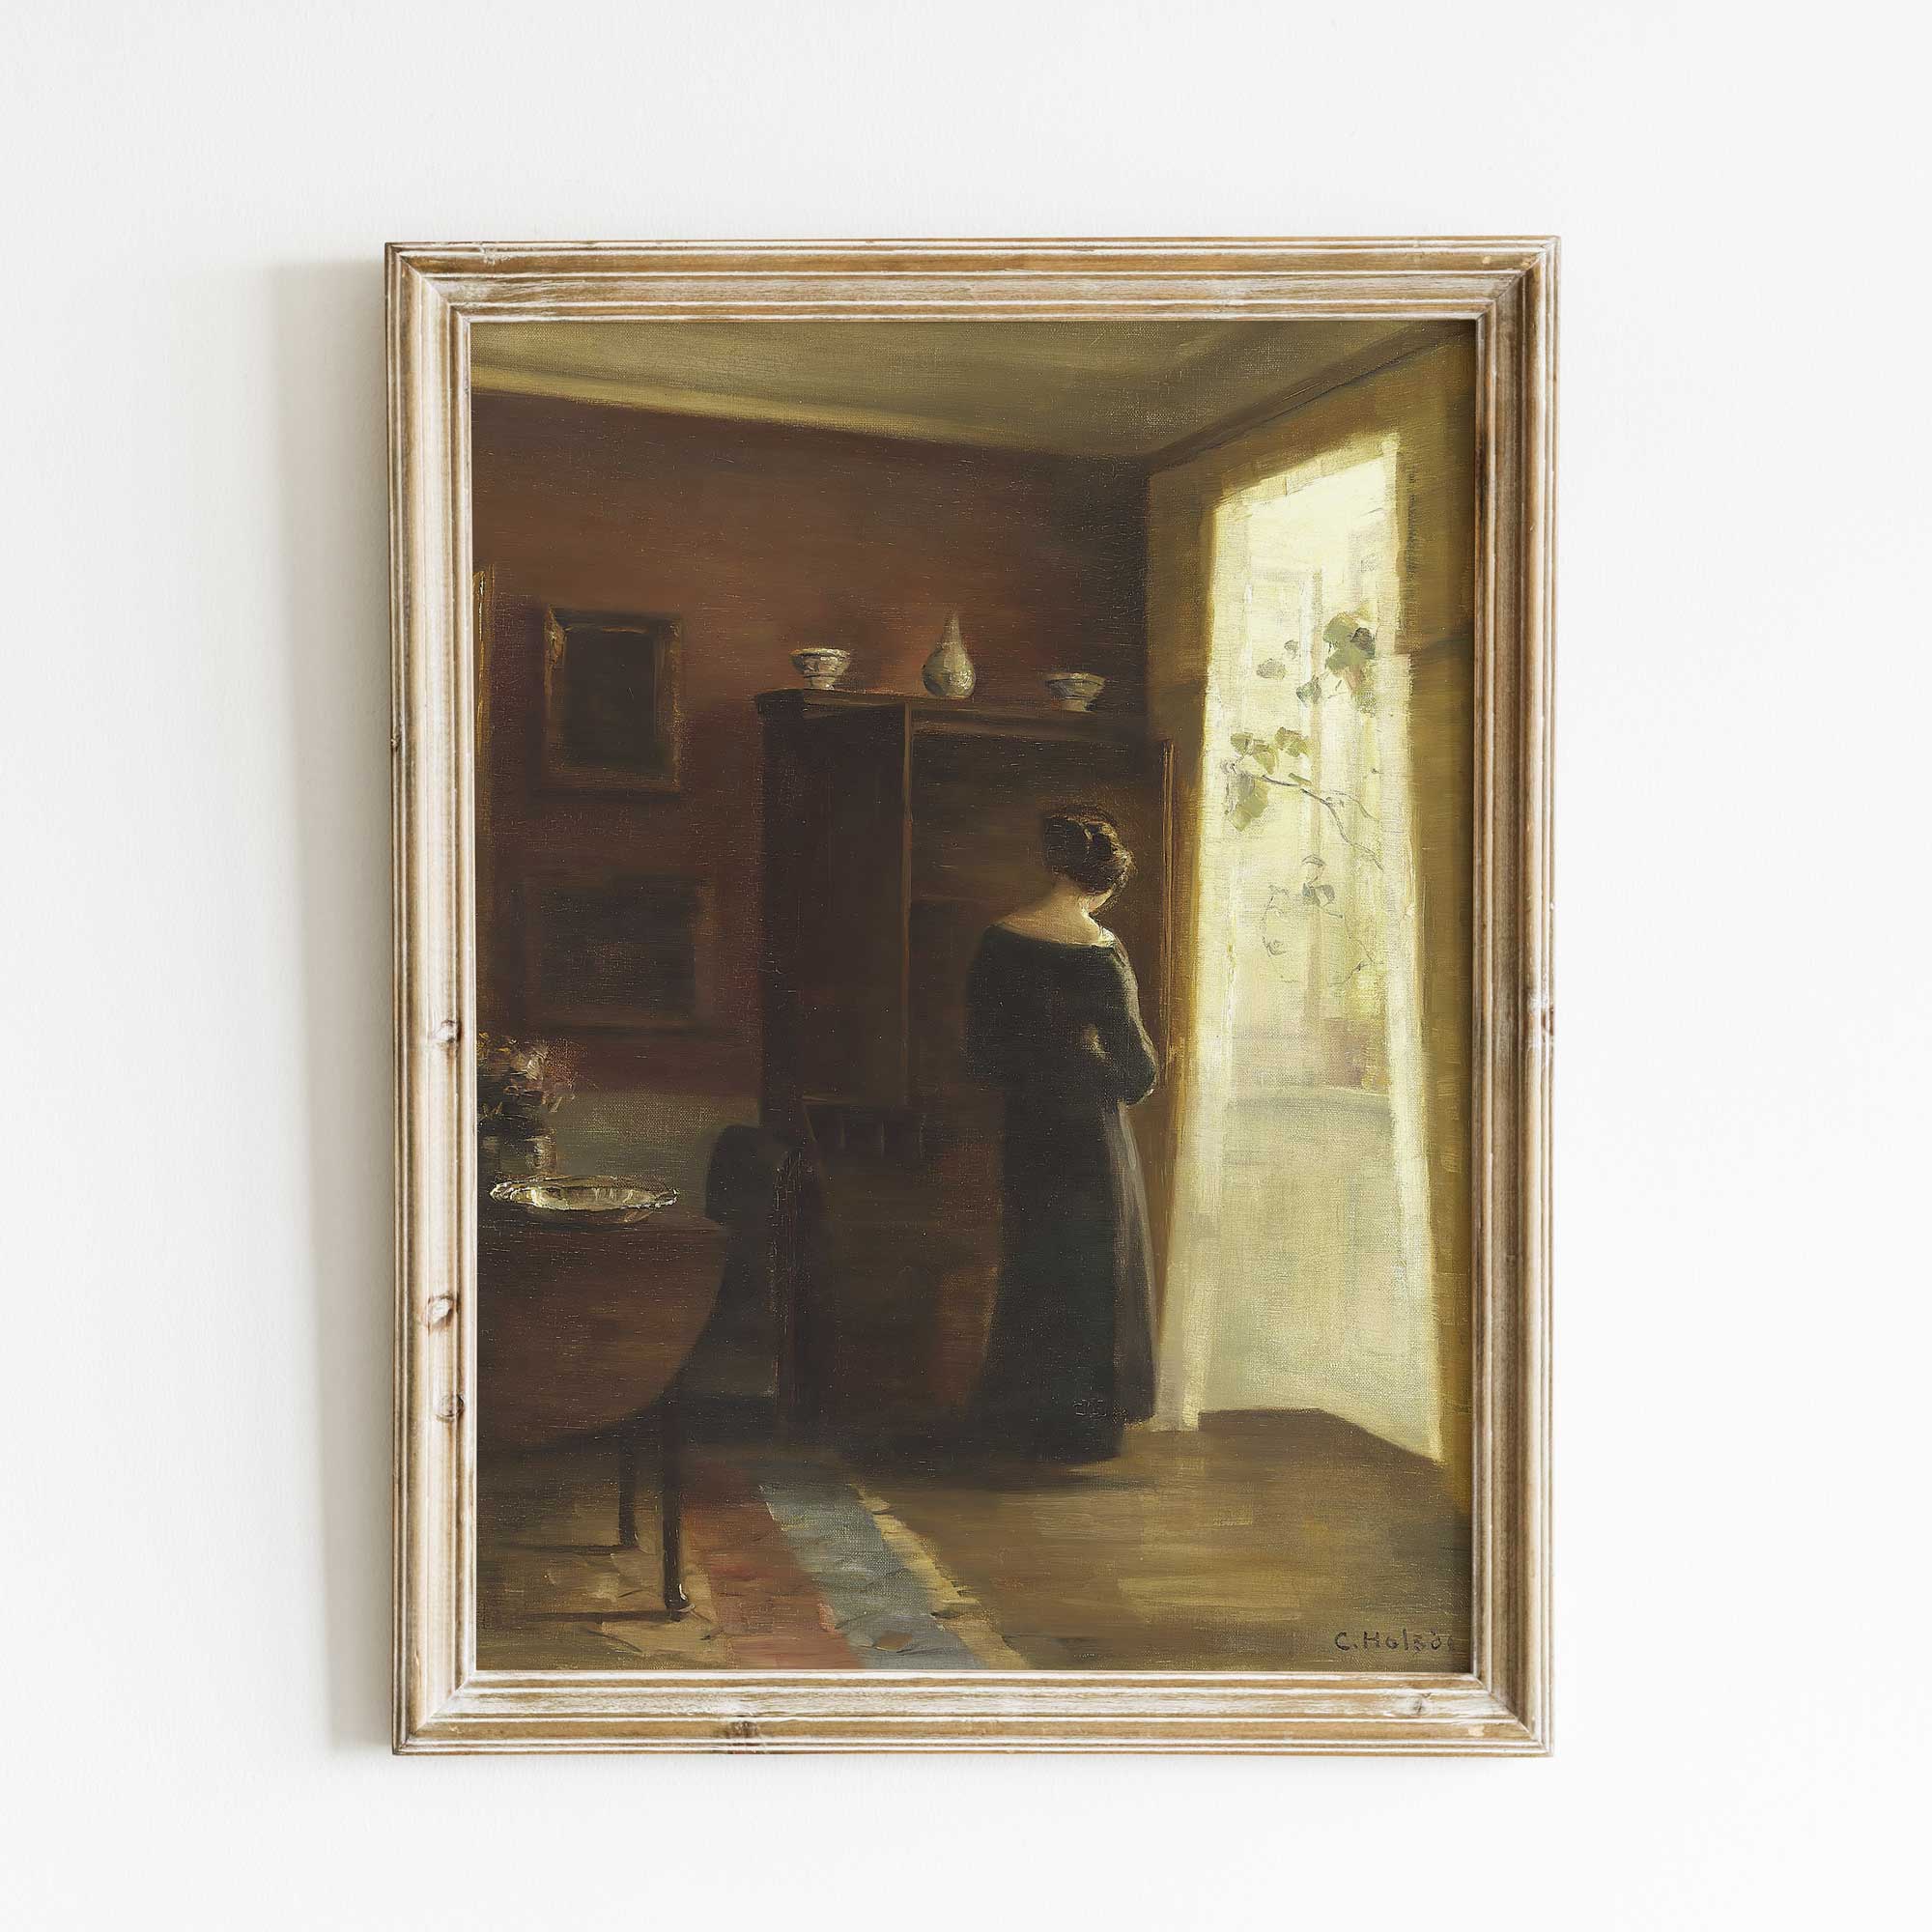 Portrait of a Lady by the Window